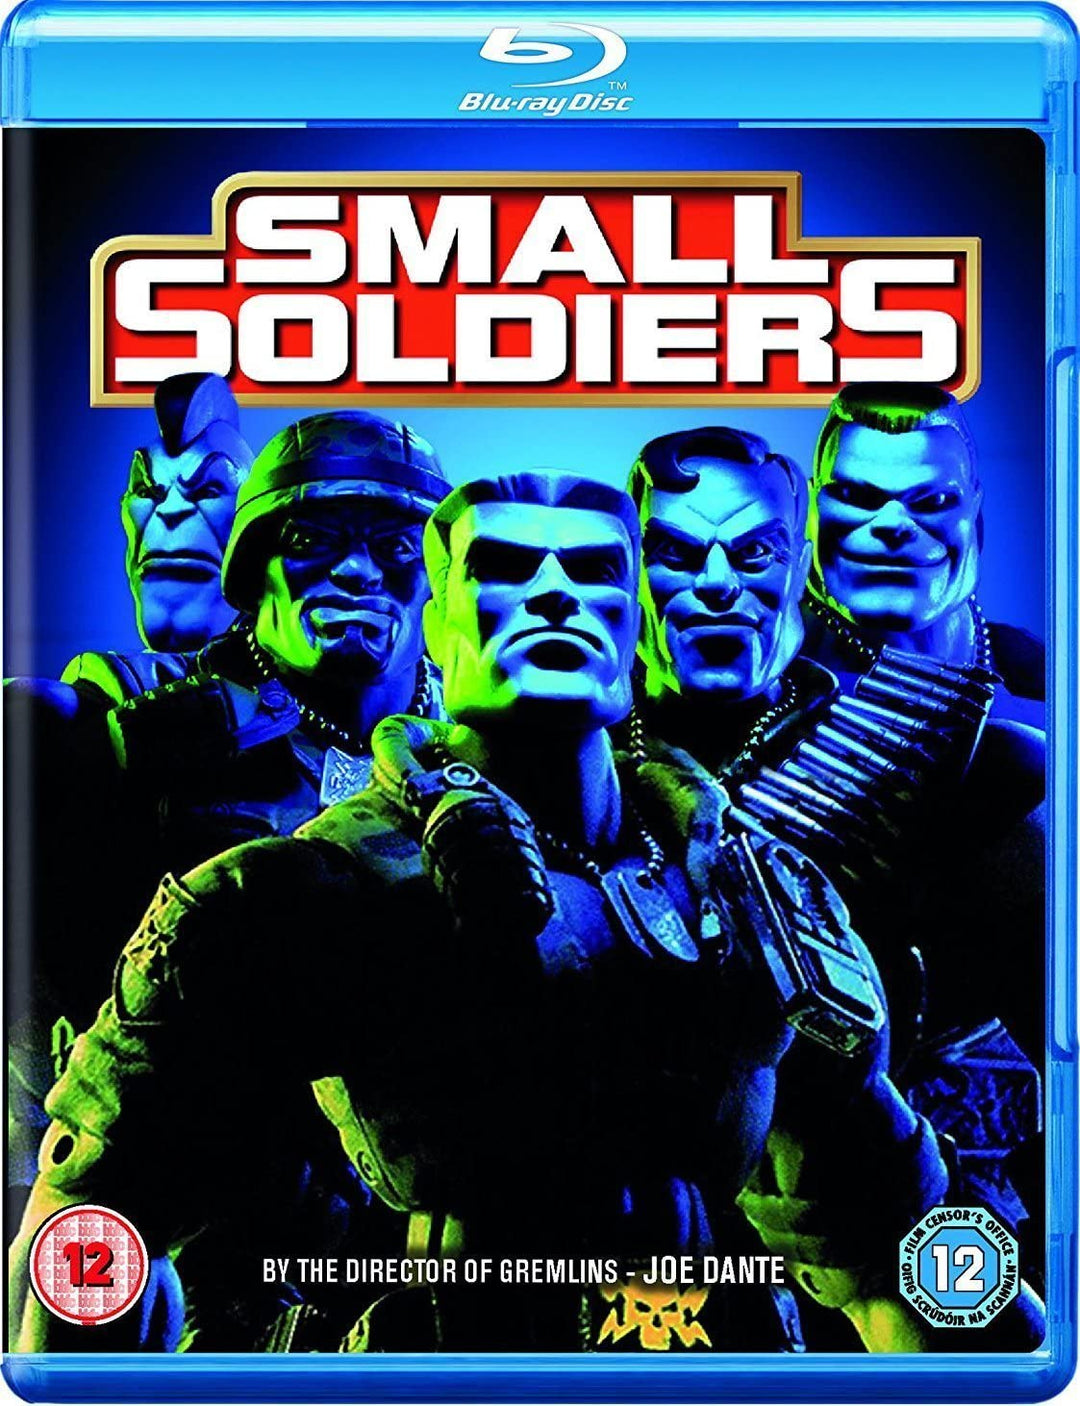 Small Soldiers - Action/Comedy [Blu-ray]